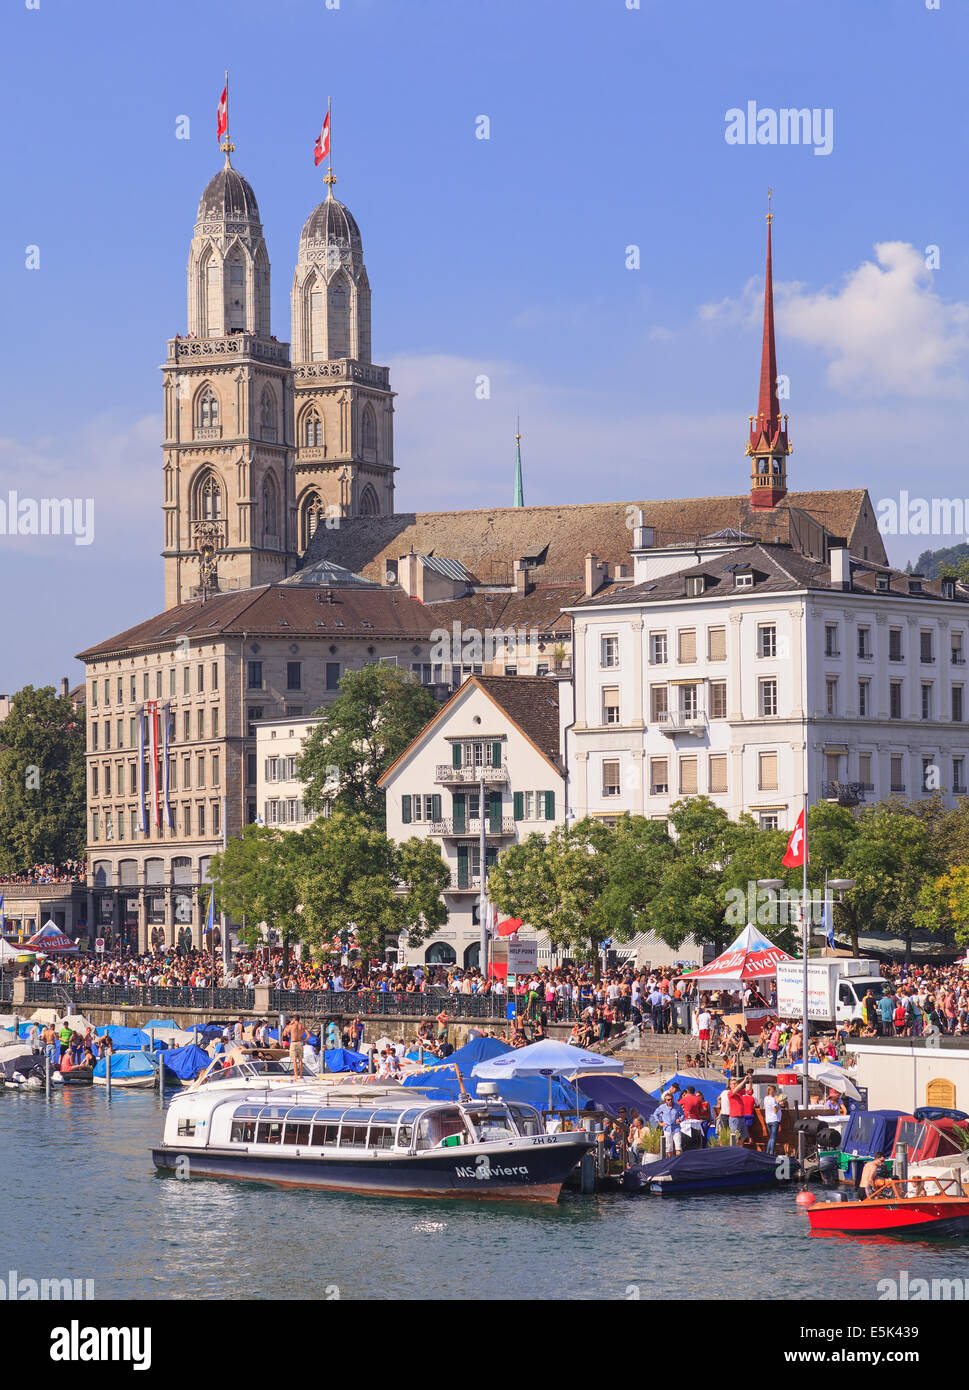 Zurich, Switzerland - 2 August, 2014: the Great Minster Cathedral (German: Grossmunster) and the Limmatquai quay during the Stre Stock Photo